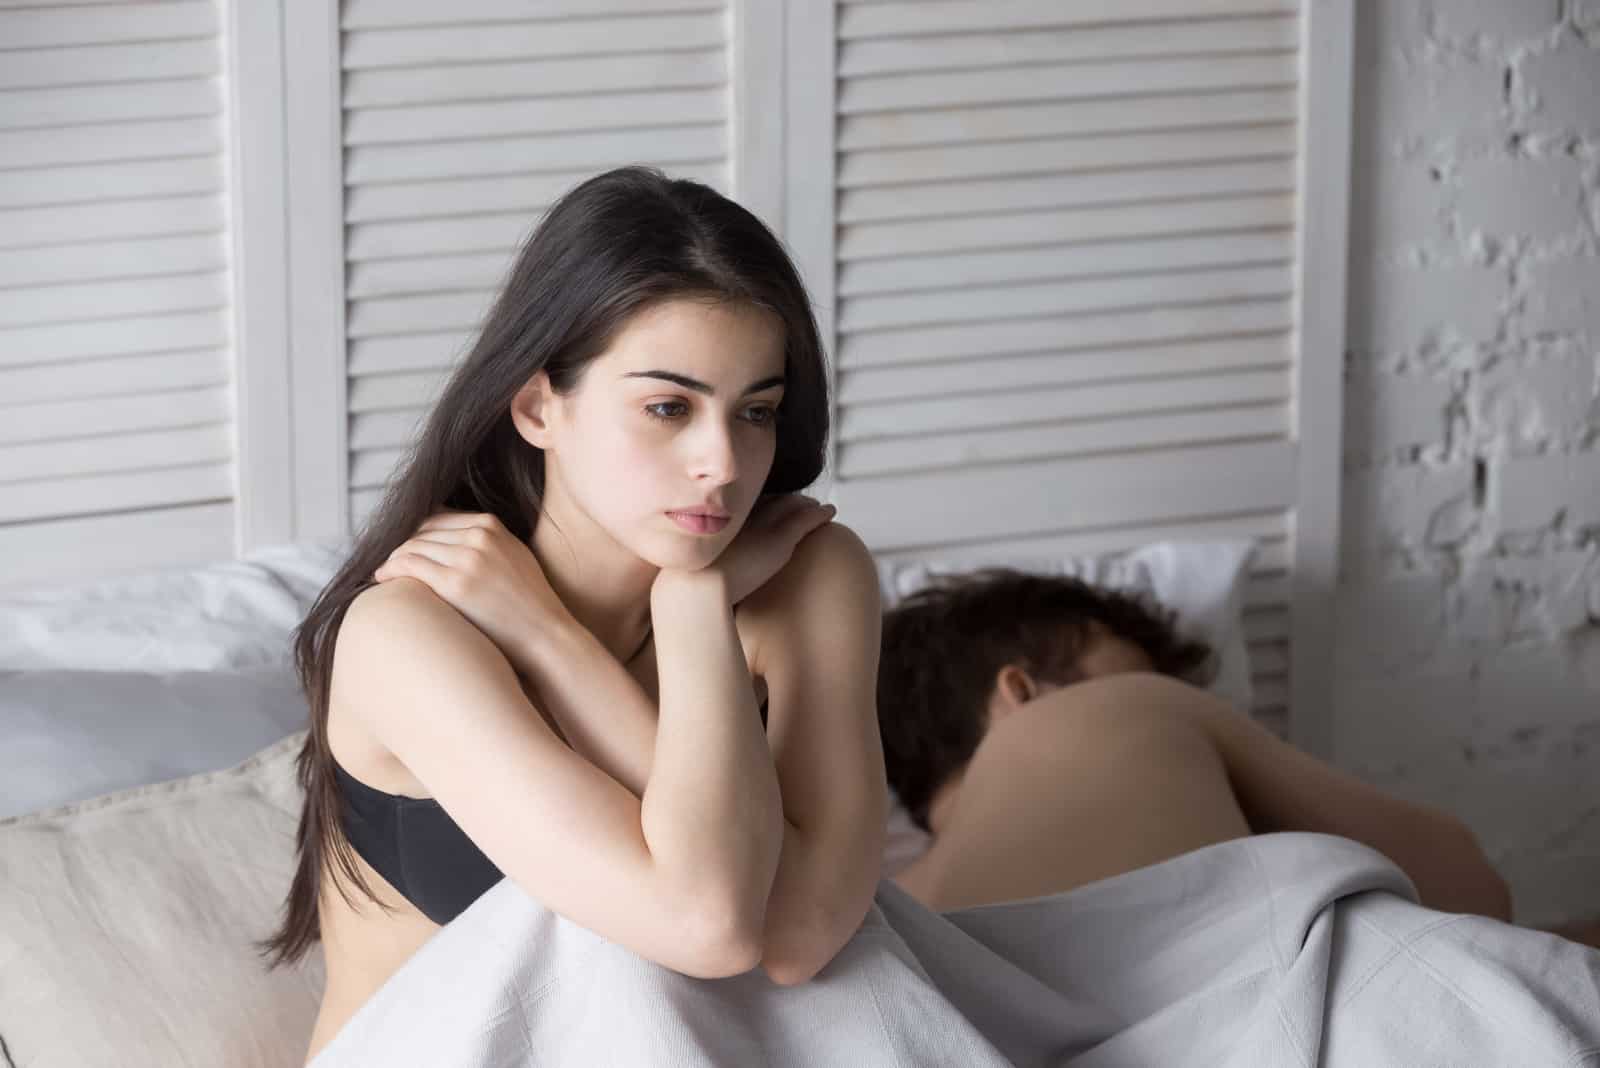 15 Psychological Facts About A Cheating Woman + Signs